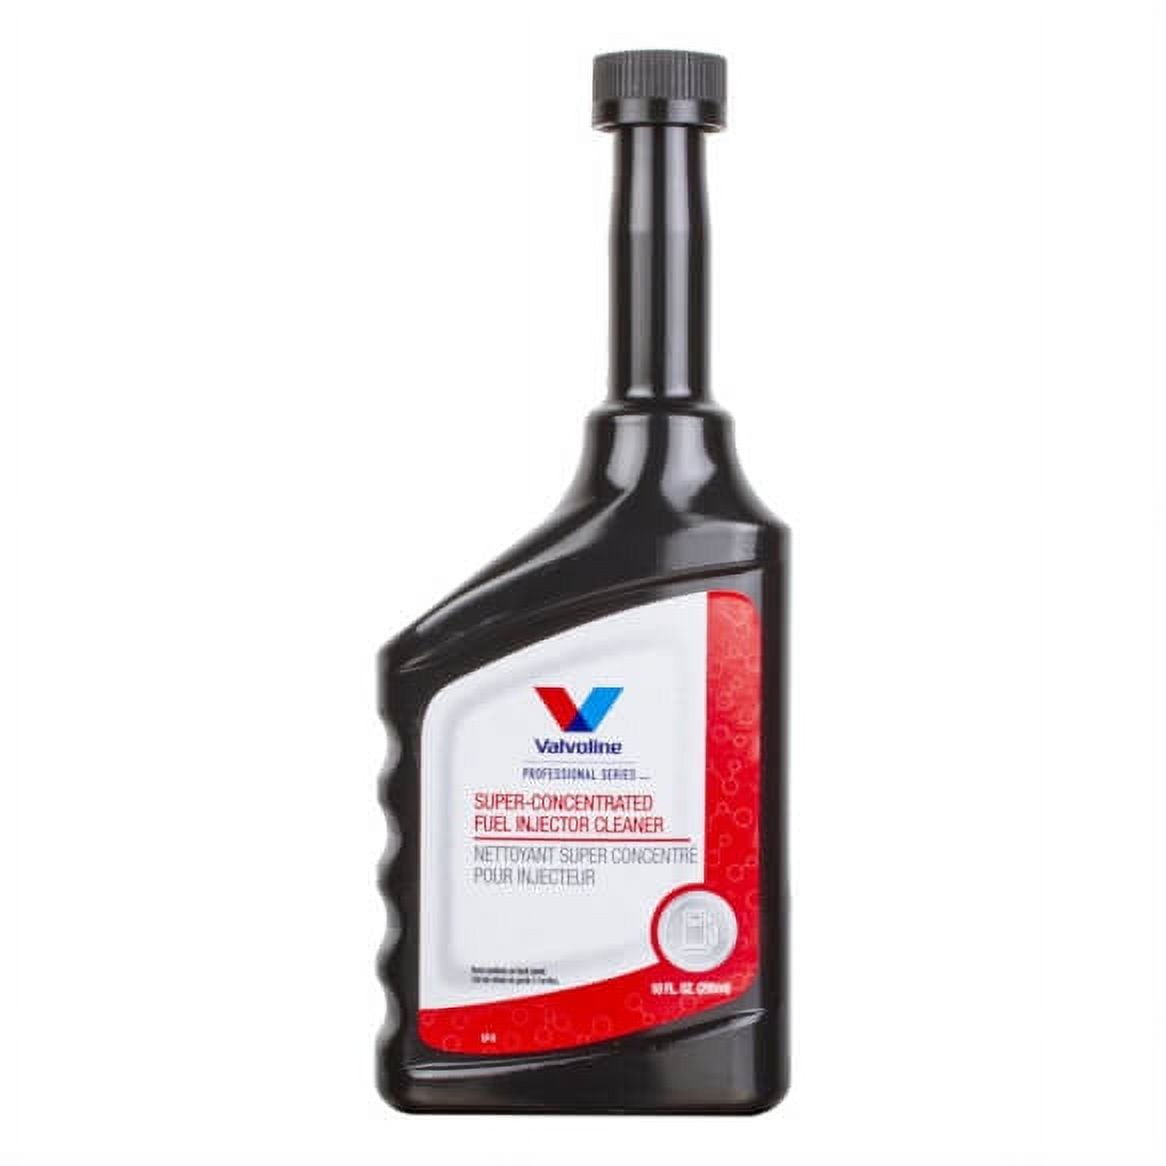 Xcelerate Advanced Fuel Injector Cleaner